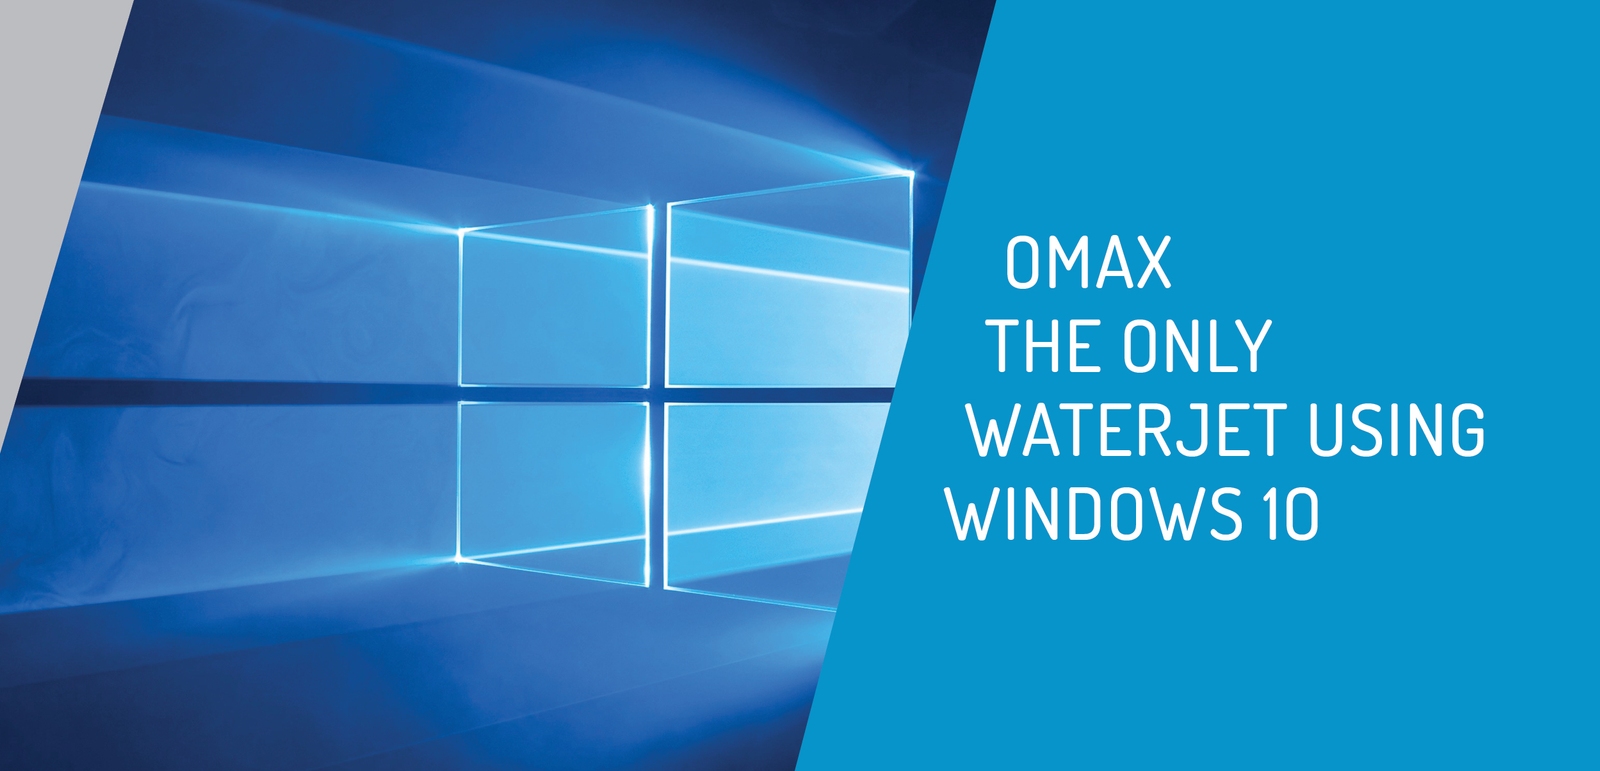 OMAX | The only waterjet using Windows 10